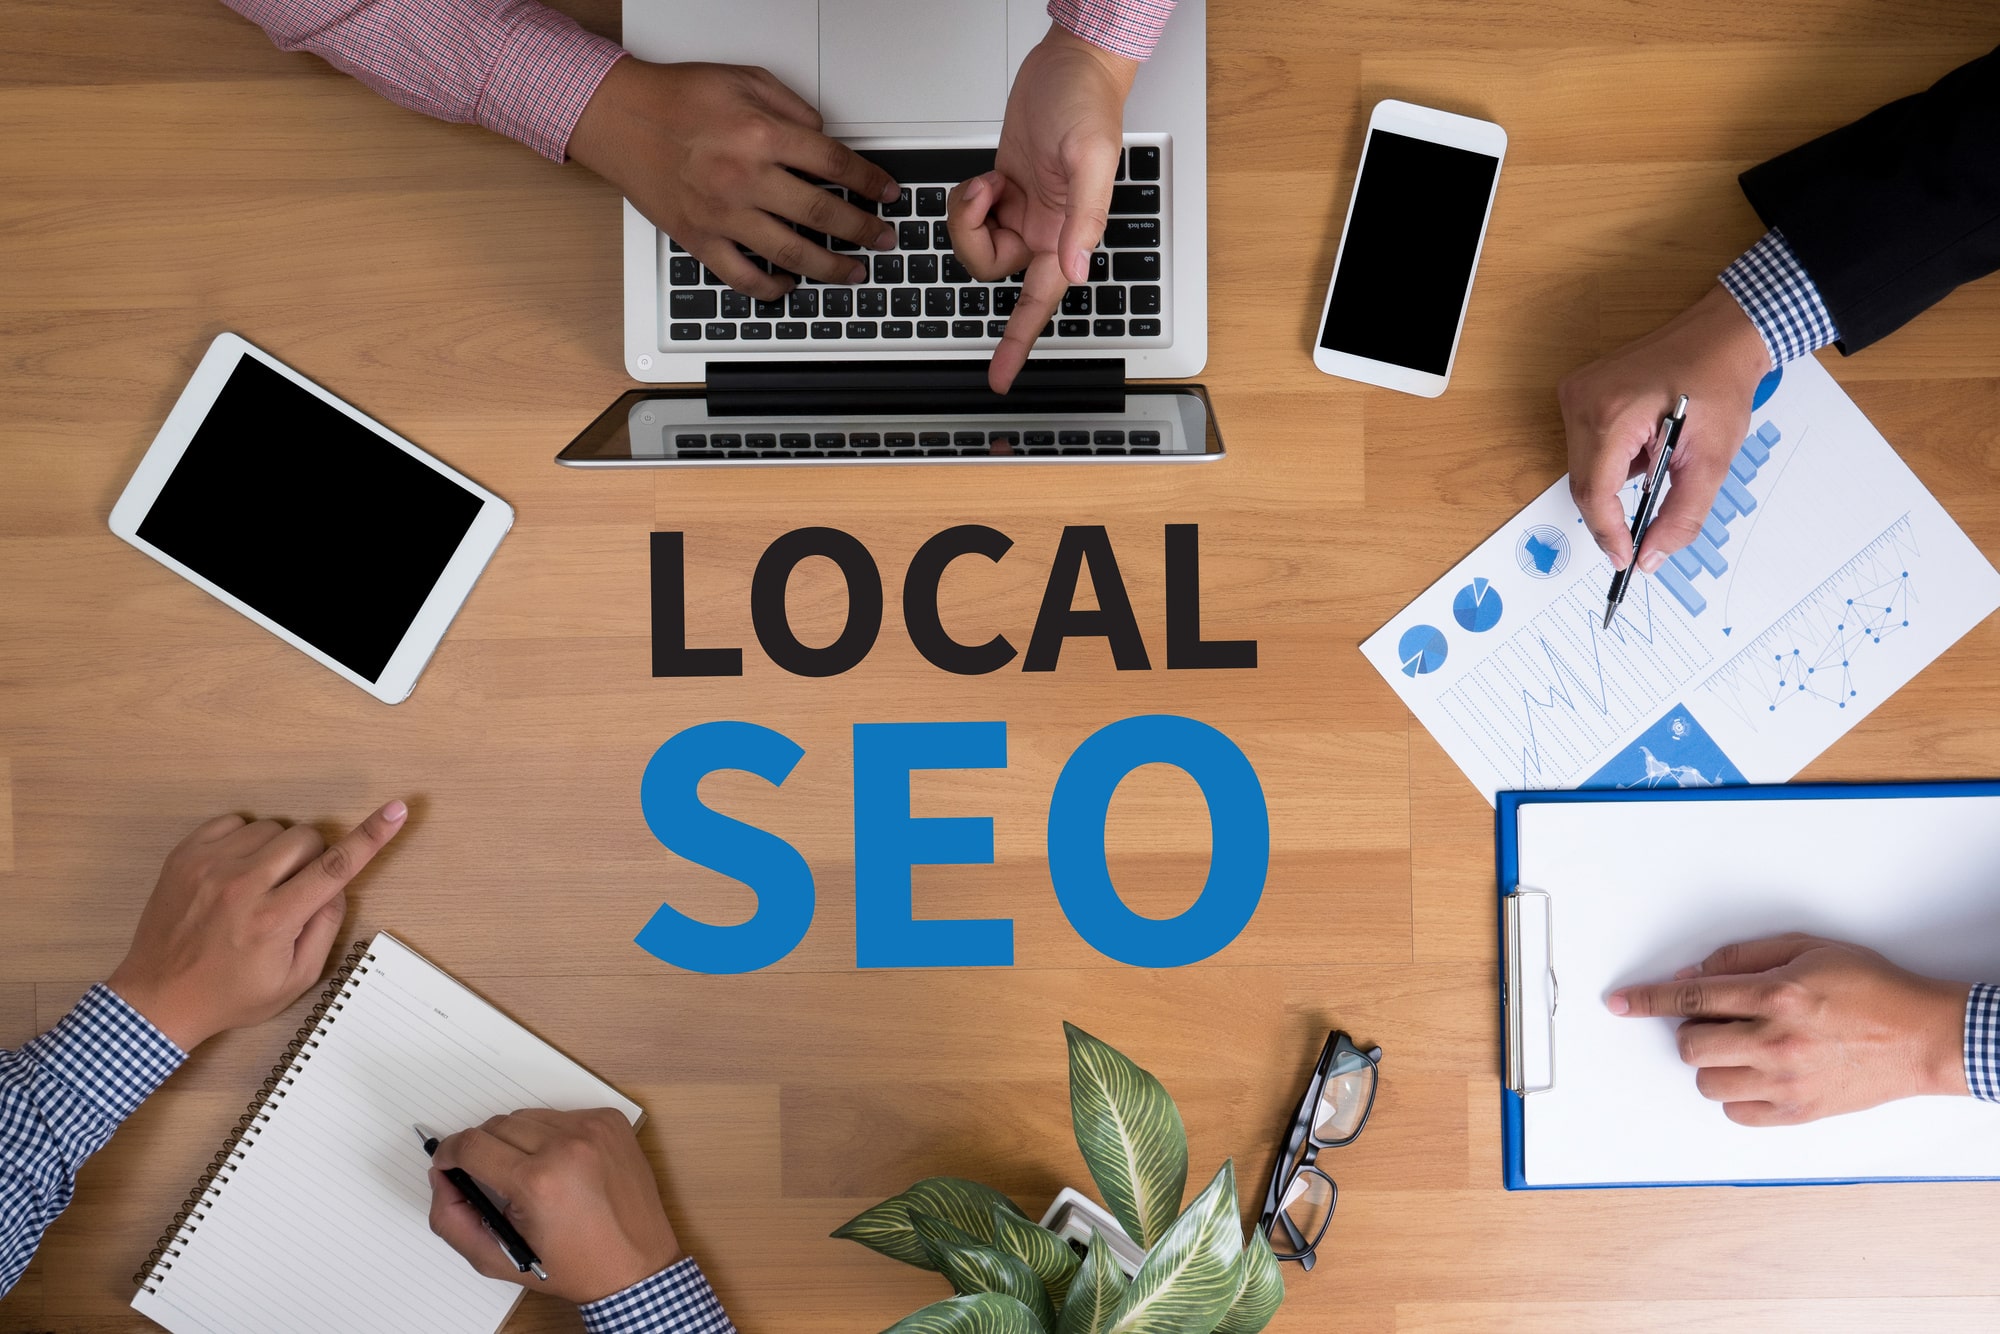 3 Tips for Hiring Local SEO Services to Improve Your Company's Website